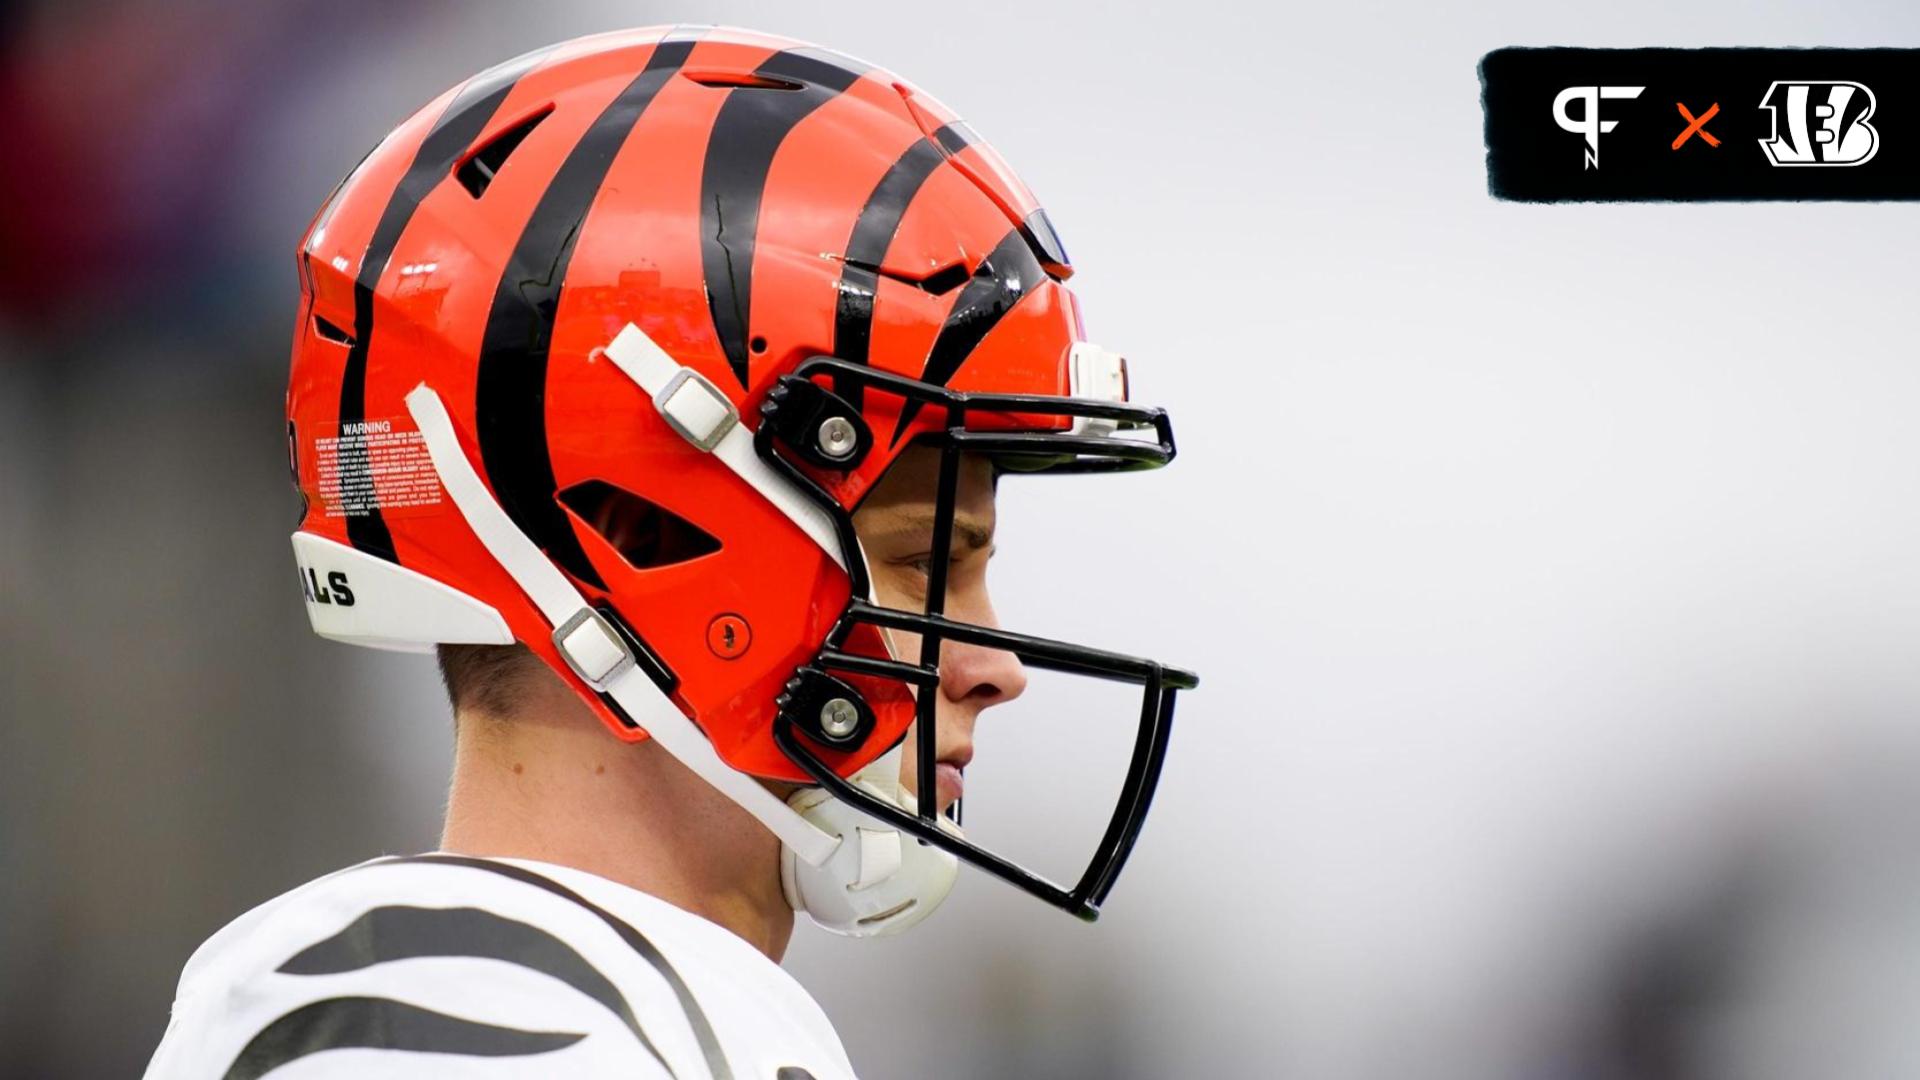 Bengals QB Joe Burrow expects to play in opener vs. Browns